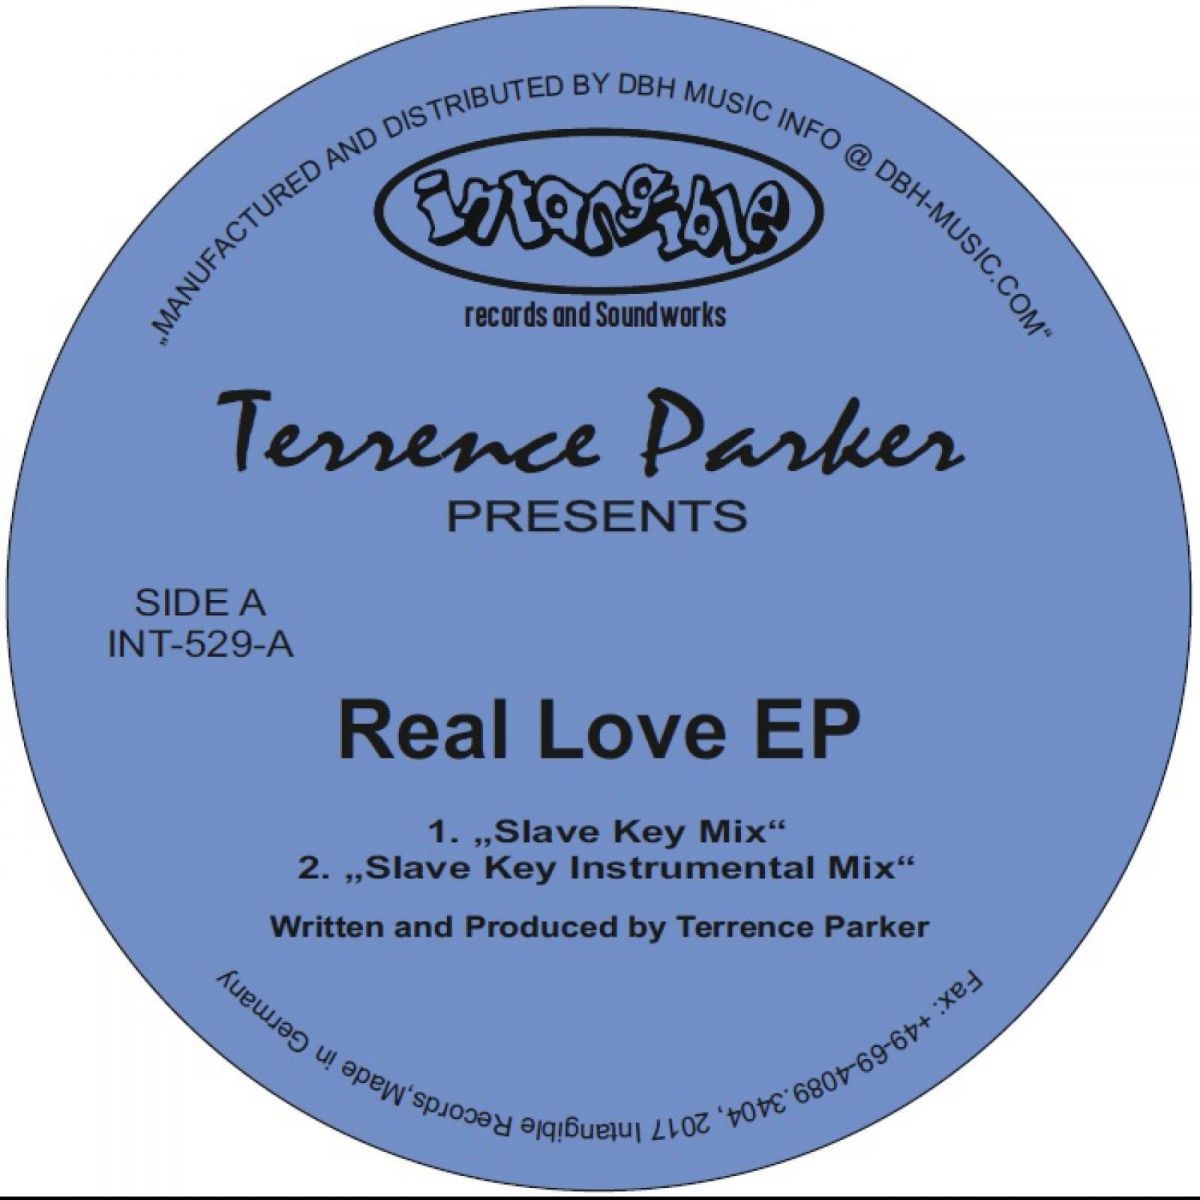 Terrence Parker - Real Love EP / Intangible Records and Soundworks